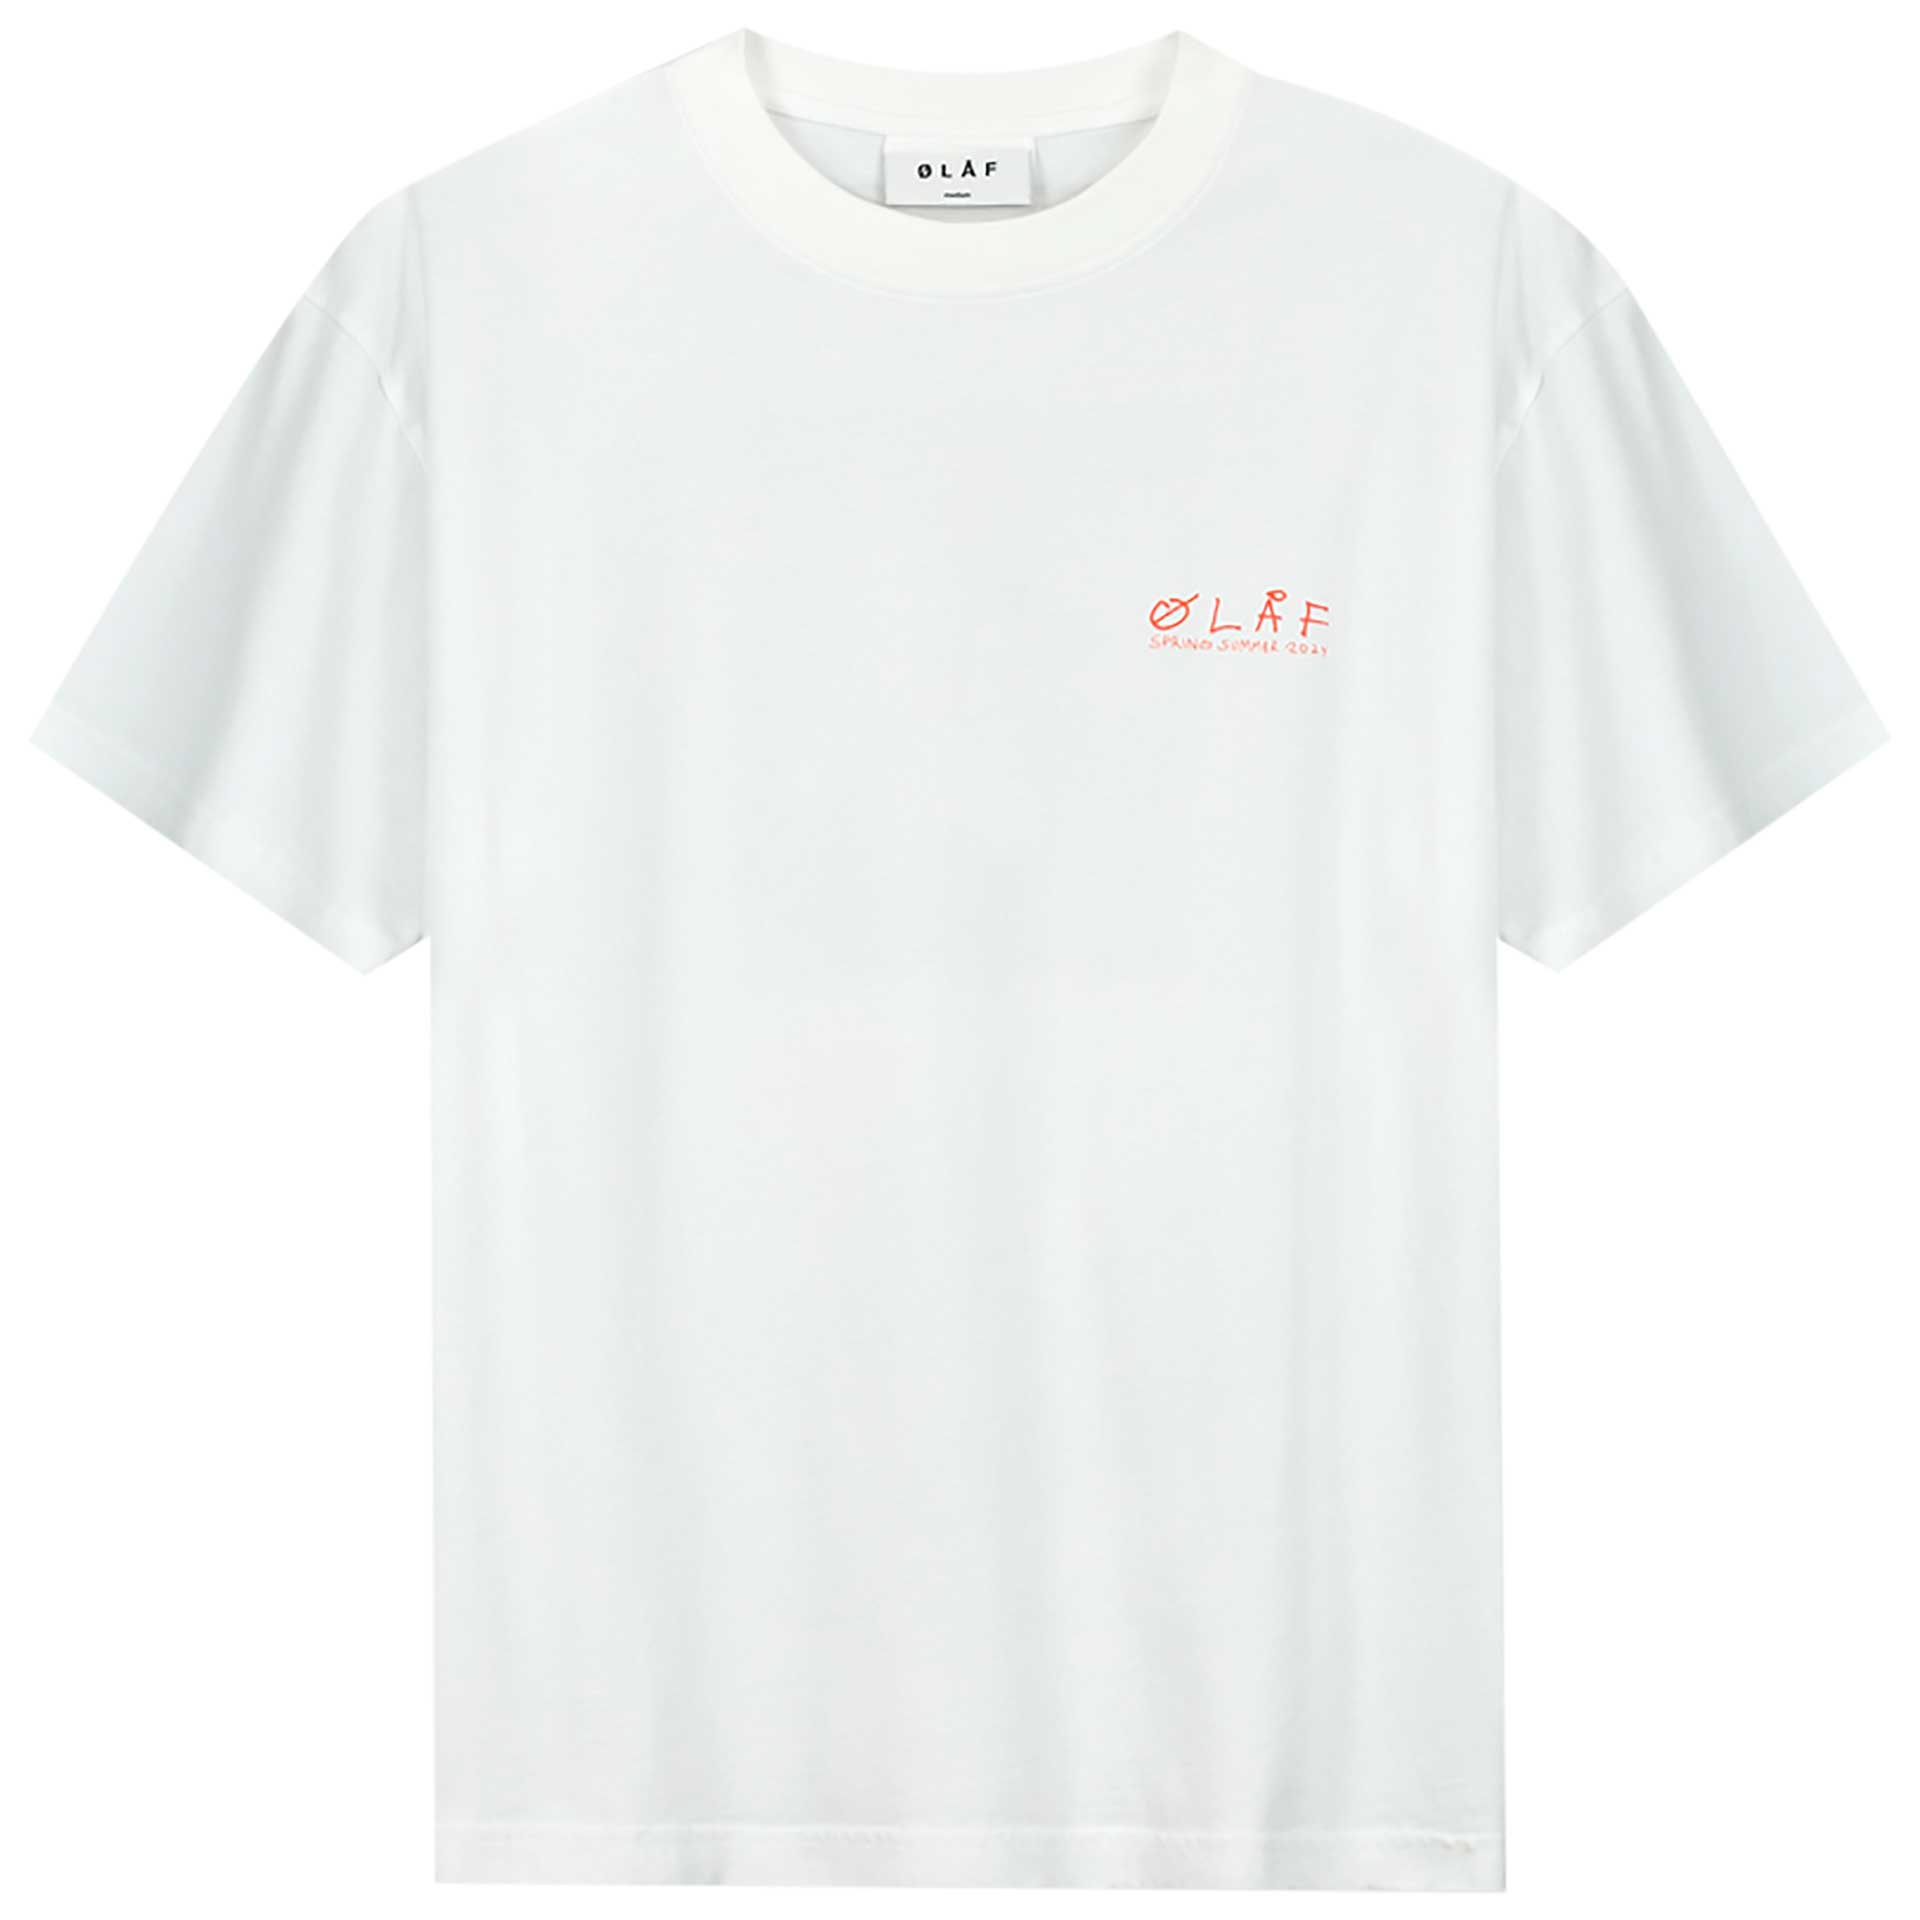 Olaf Hussein T-shirt Notes 2